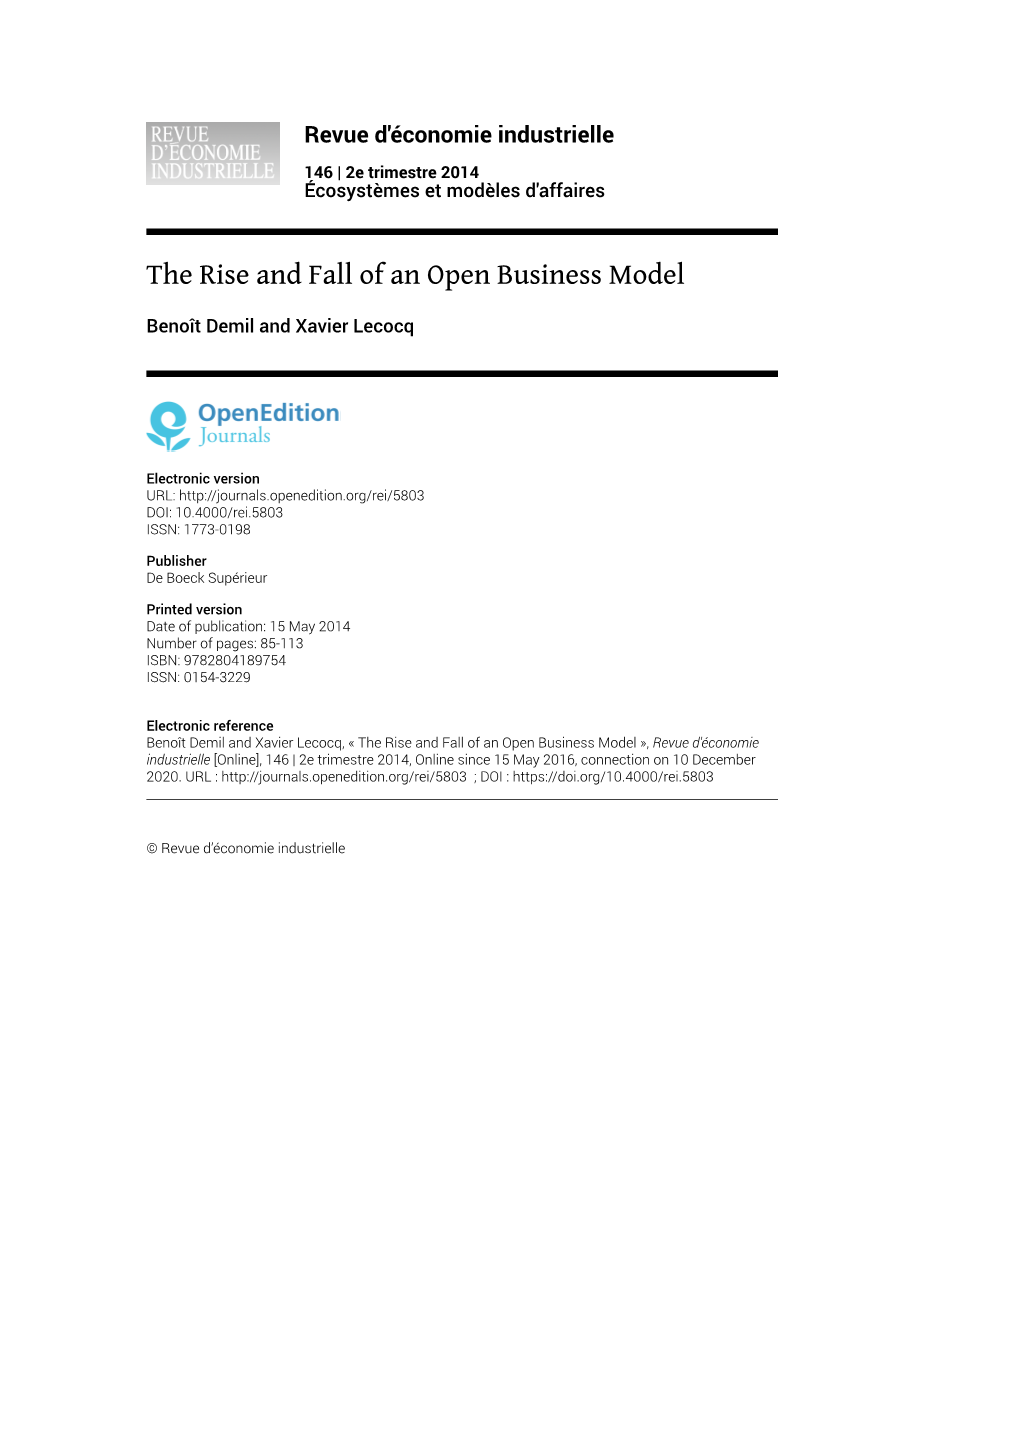 The Rise and Fall of an Open Business Model